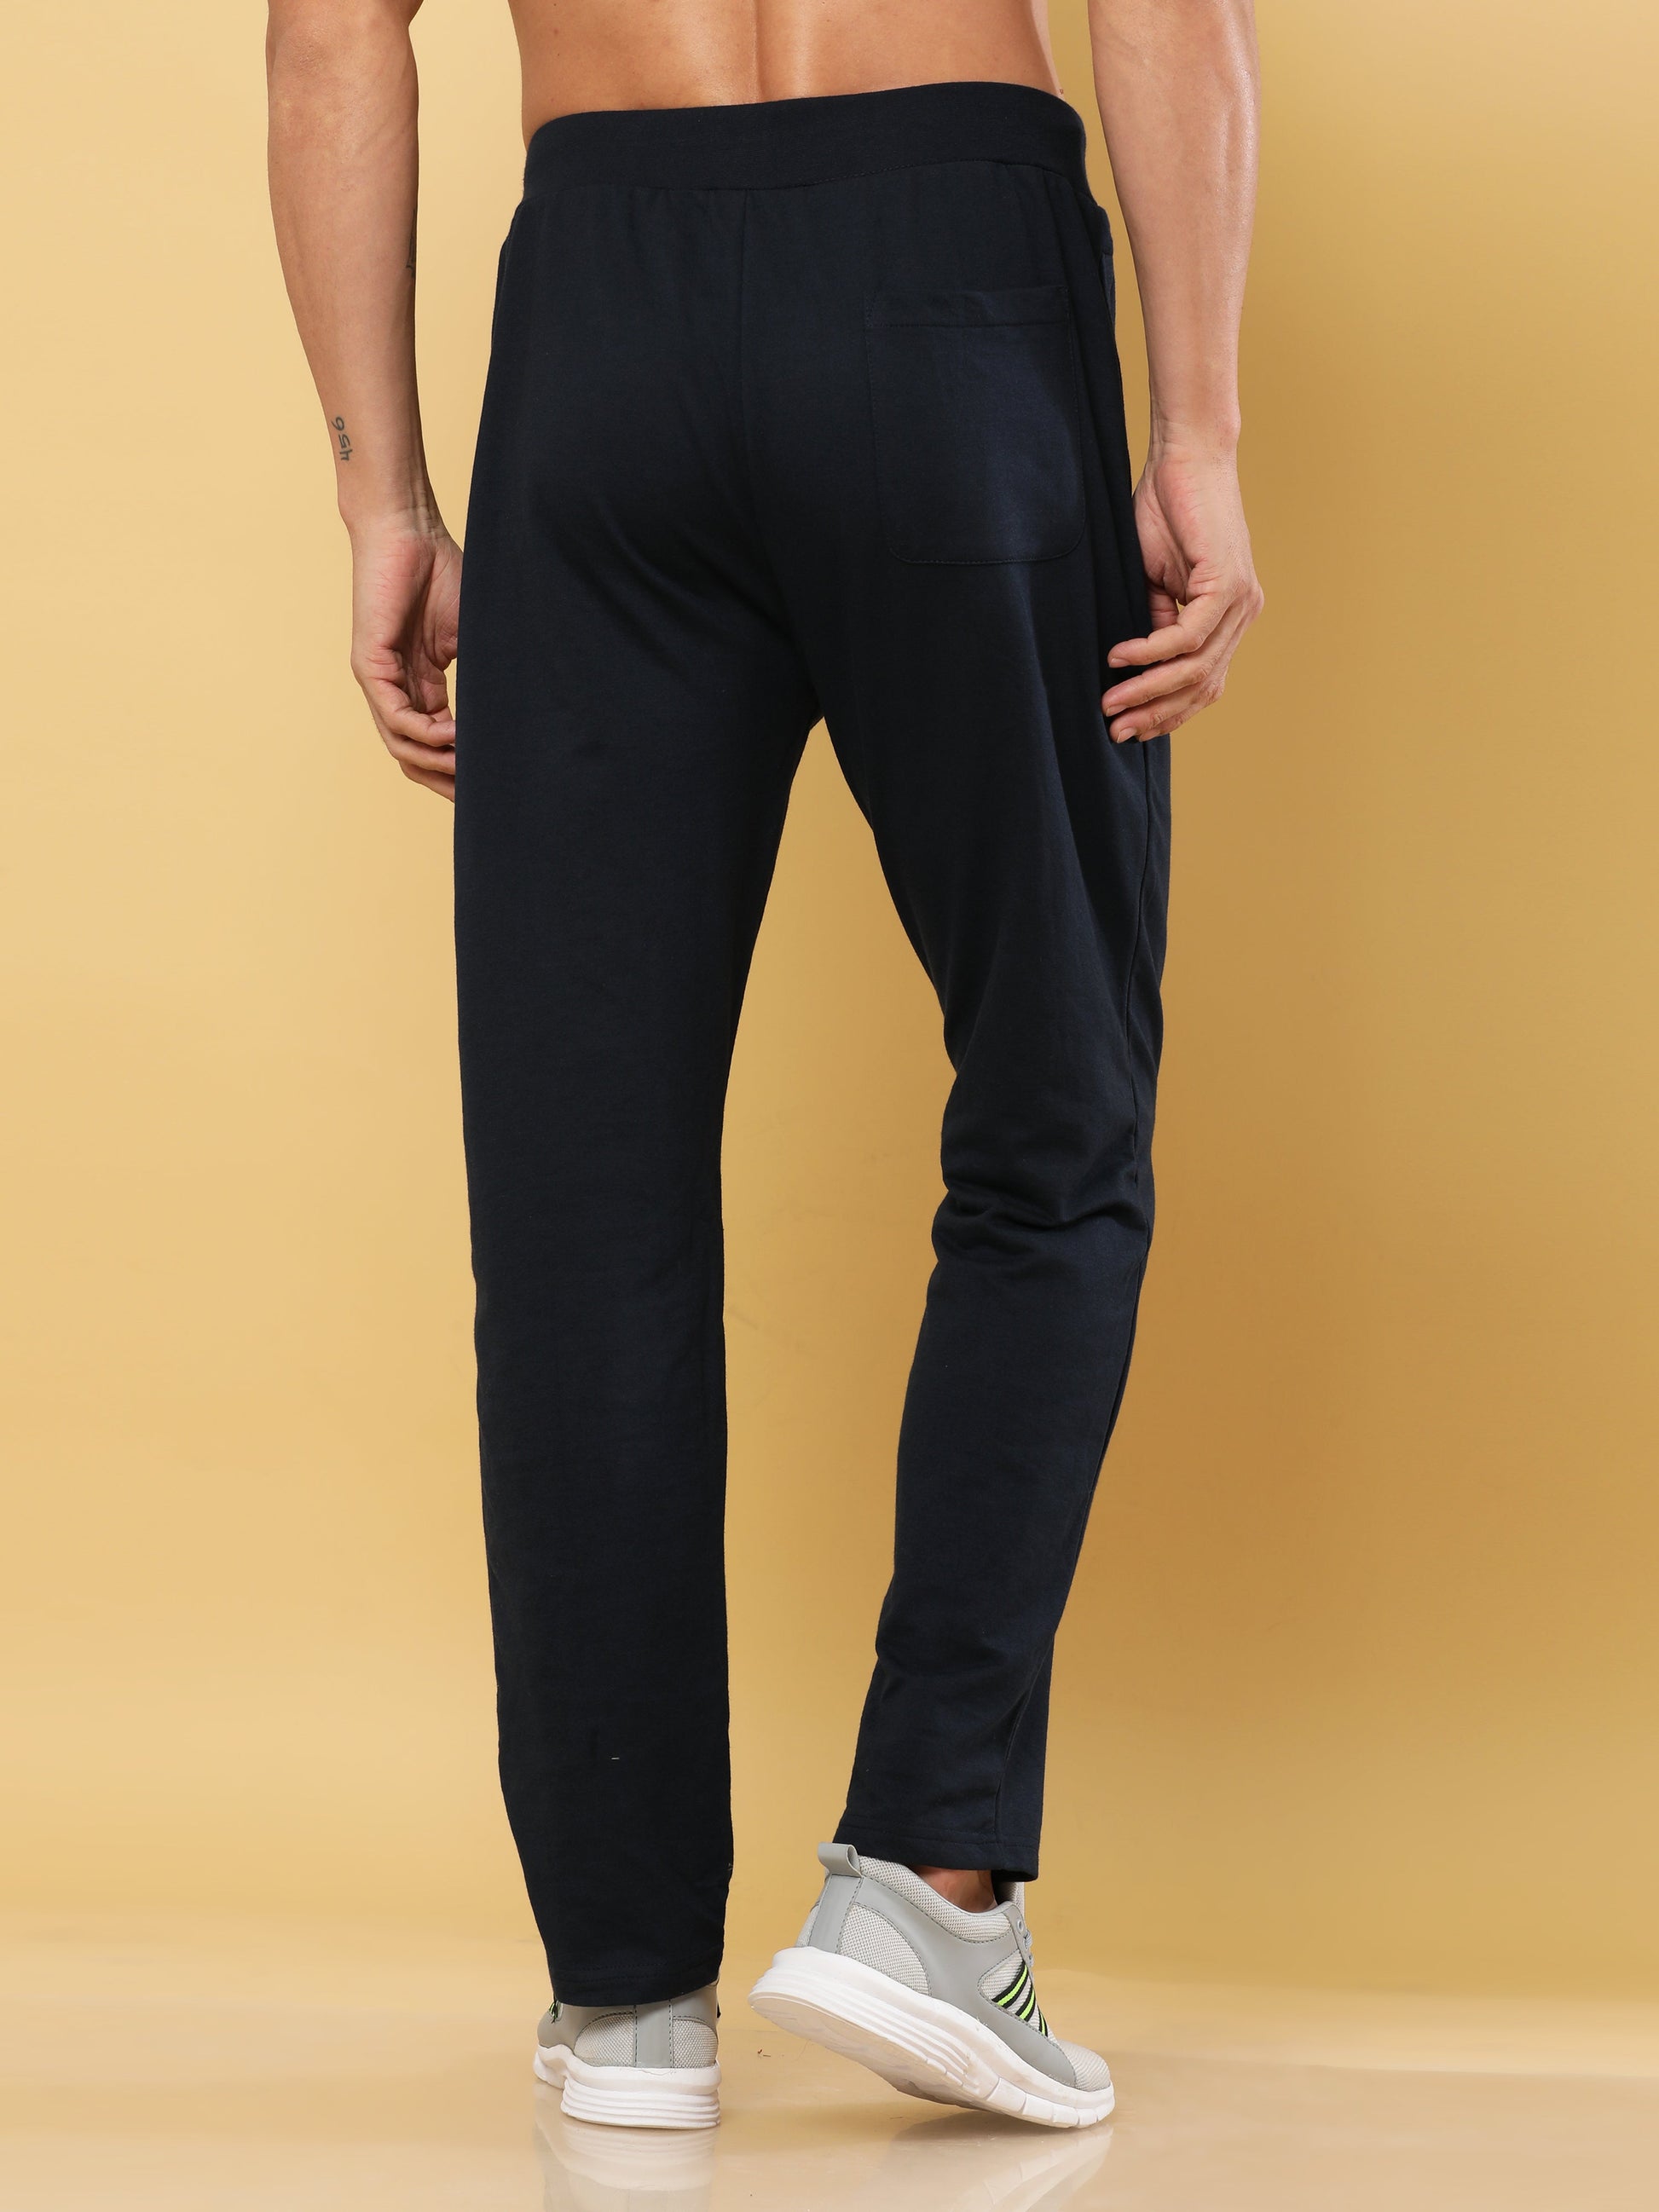 Buy Blue Mens Lounge Pants at Great Price Online – DAKS NEO CLOTHING CO. INDIA